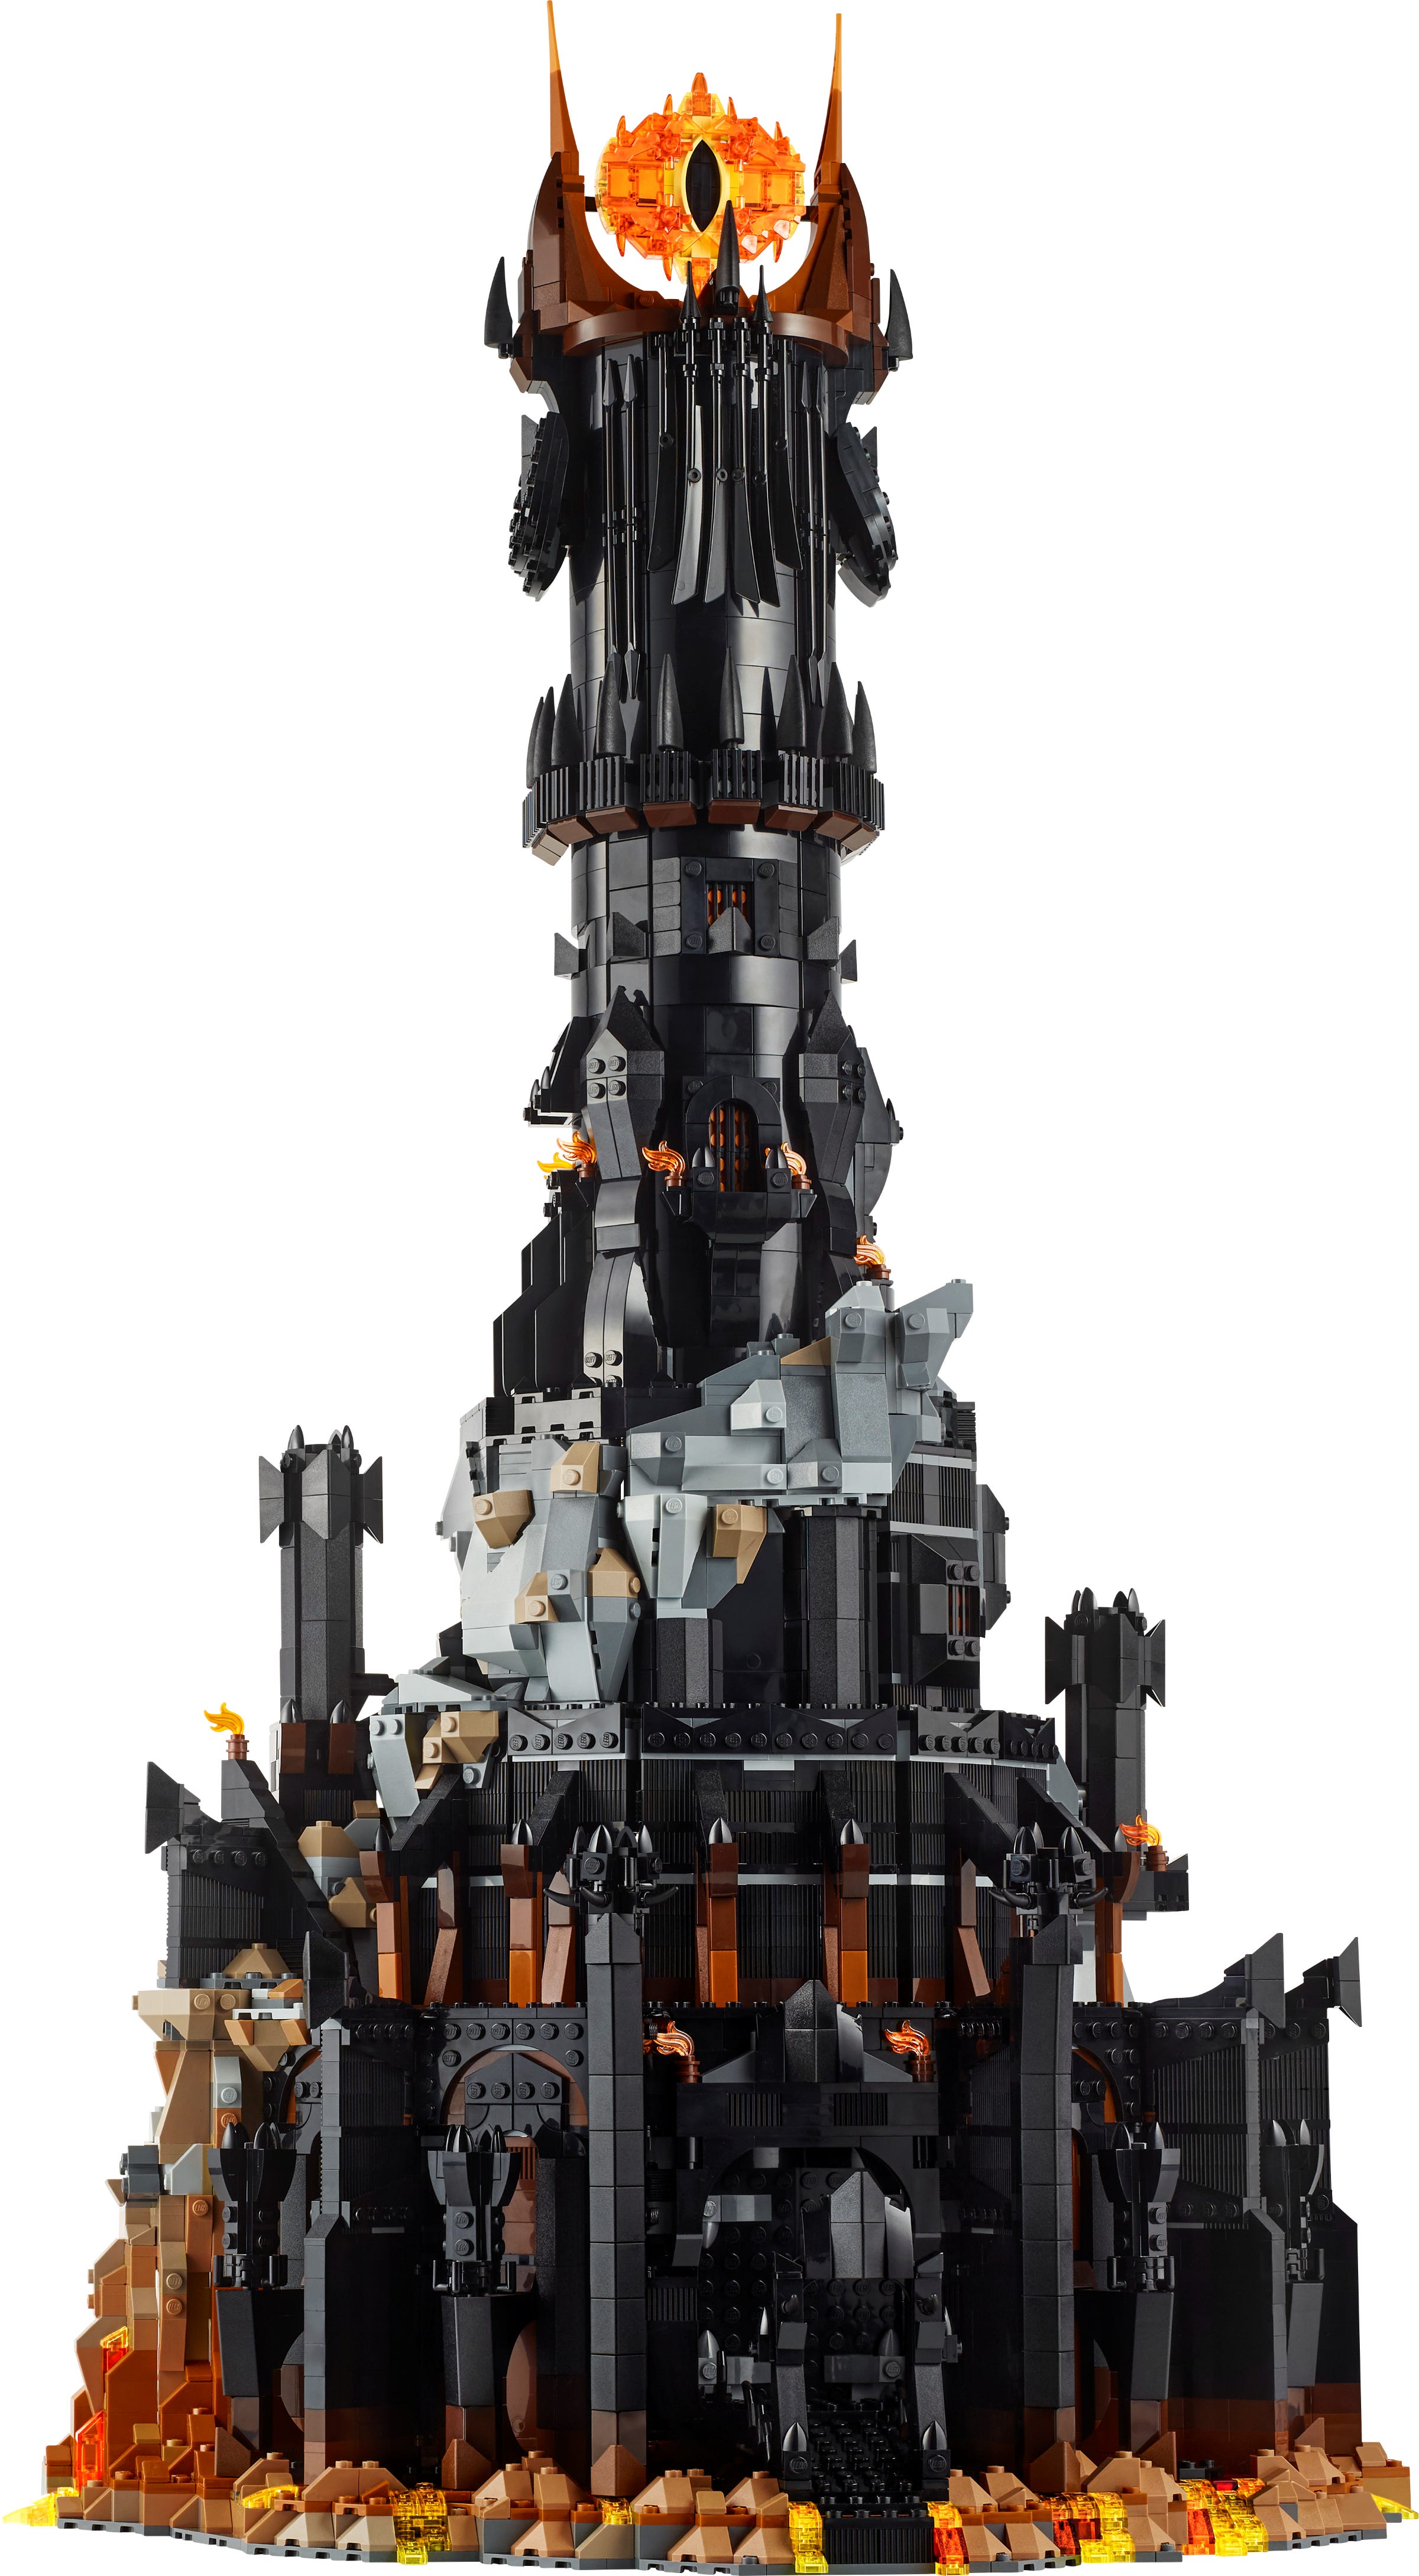 LEGO The Lord of the Rings: Barad-dûr